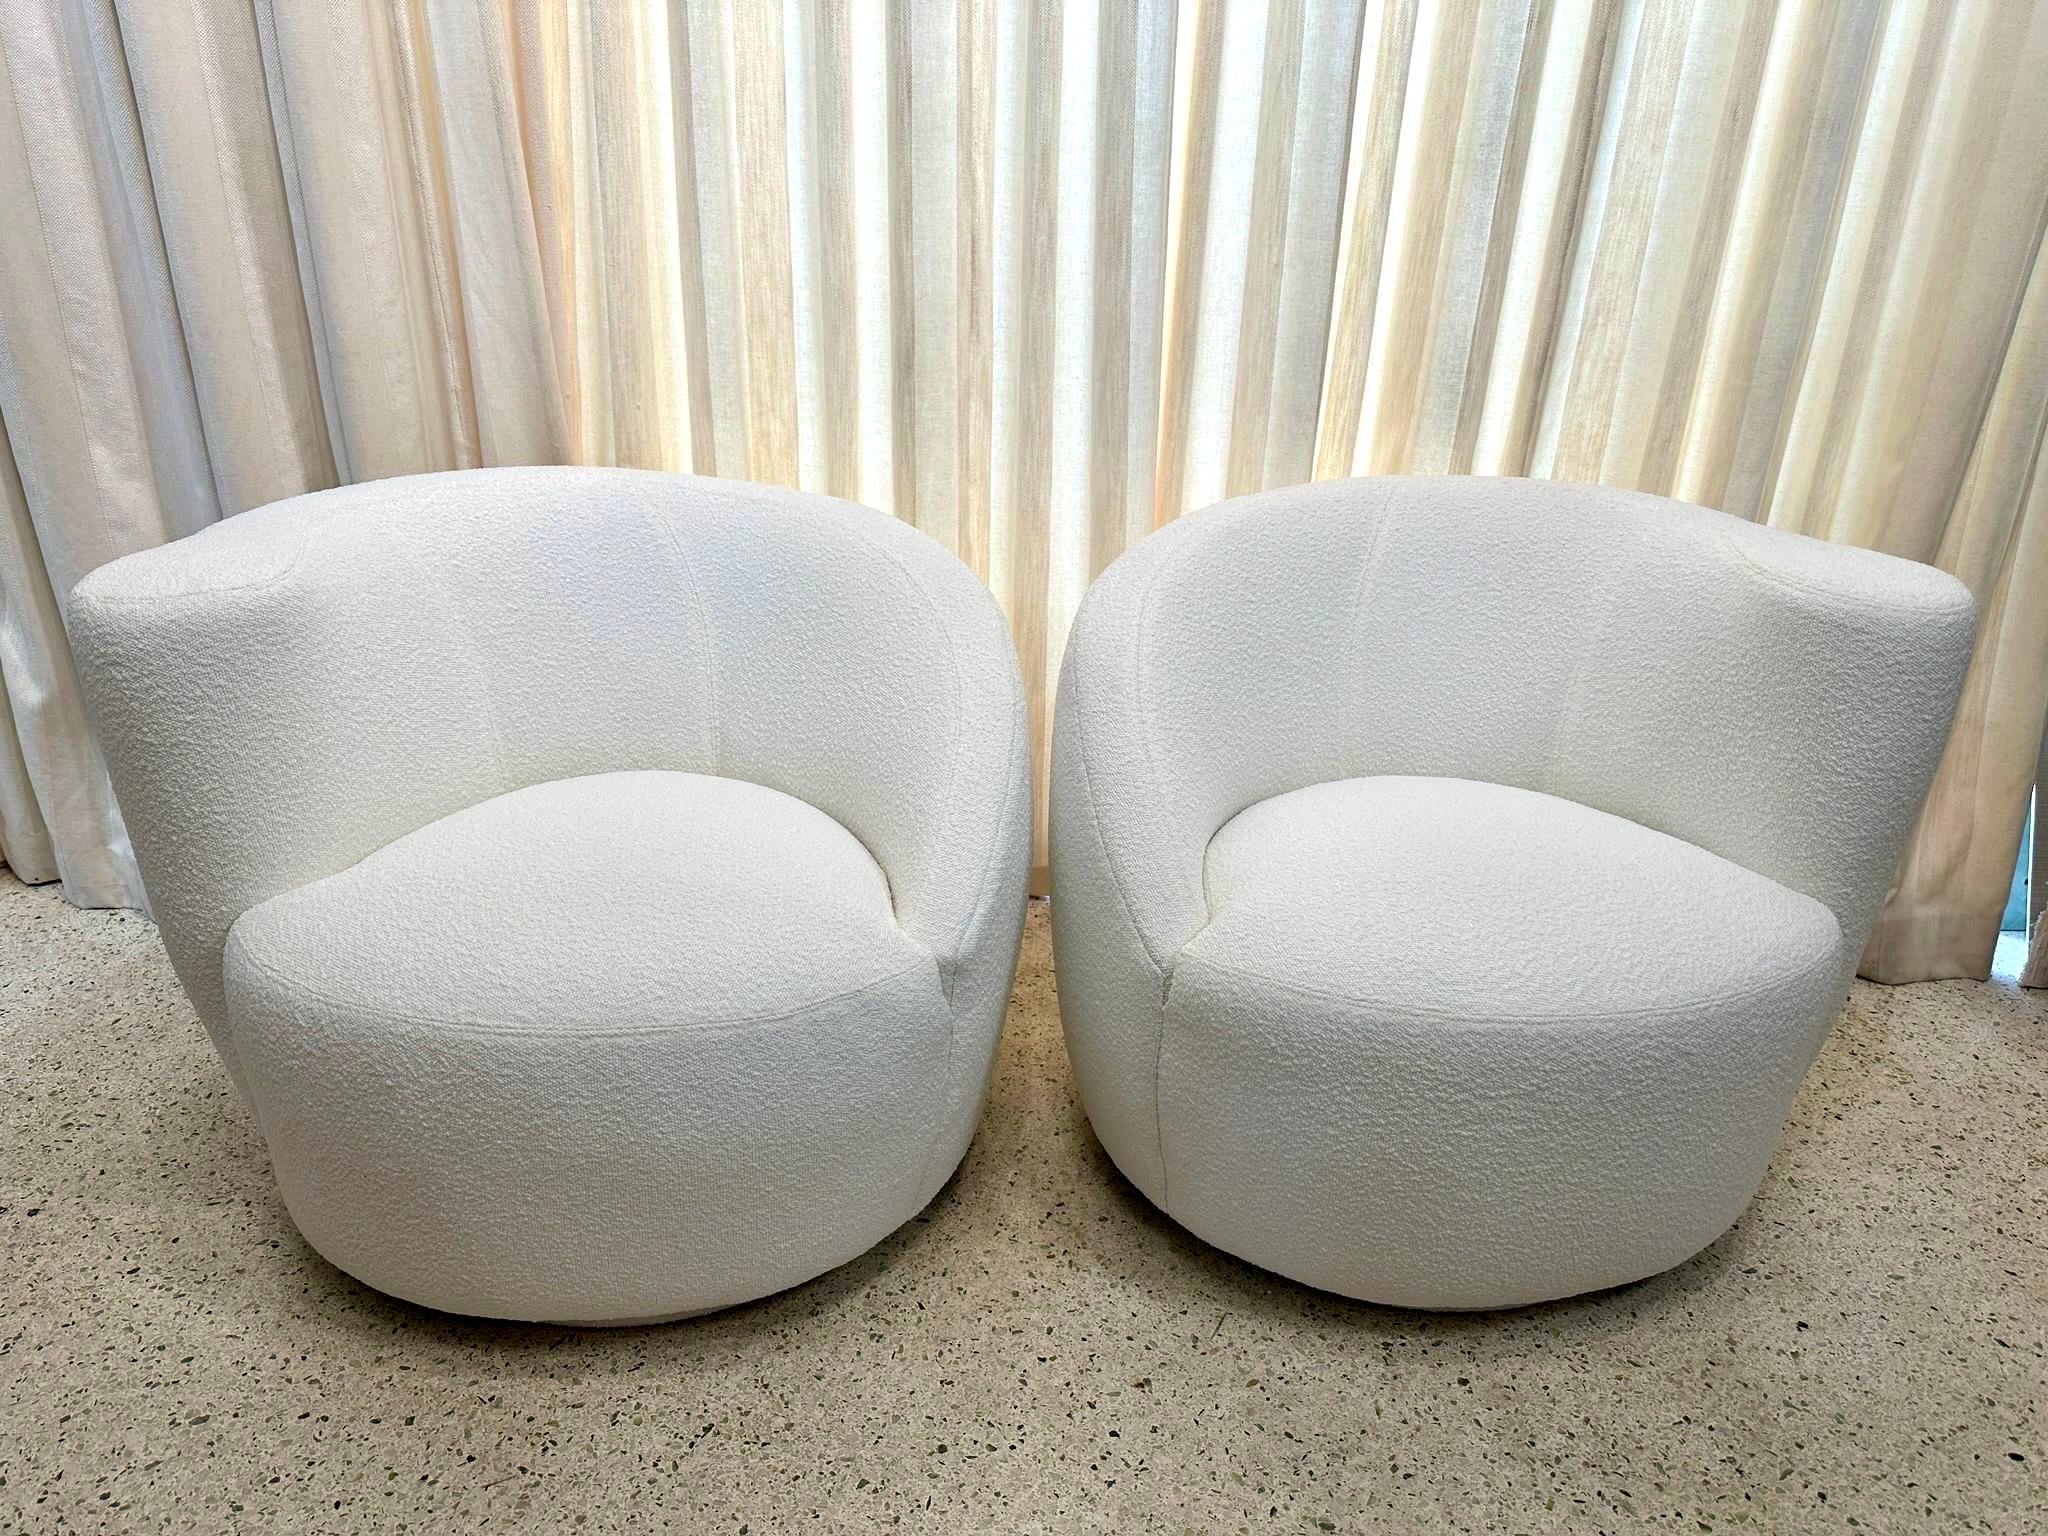 Newly reupholstered in a soft and nubby bouclé, these 'Corkscrew' swivel chairs, also often referred to as 'Nautilus', by Vladimir Kagan for Directional, circa 1980s / 90s. These classic Post-Modern club chairs swivel 180 degrees on a circular